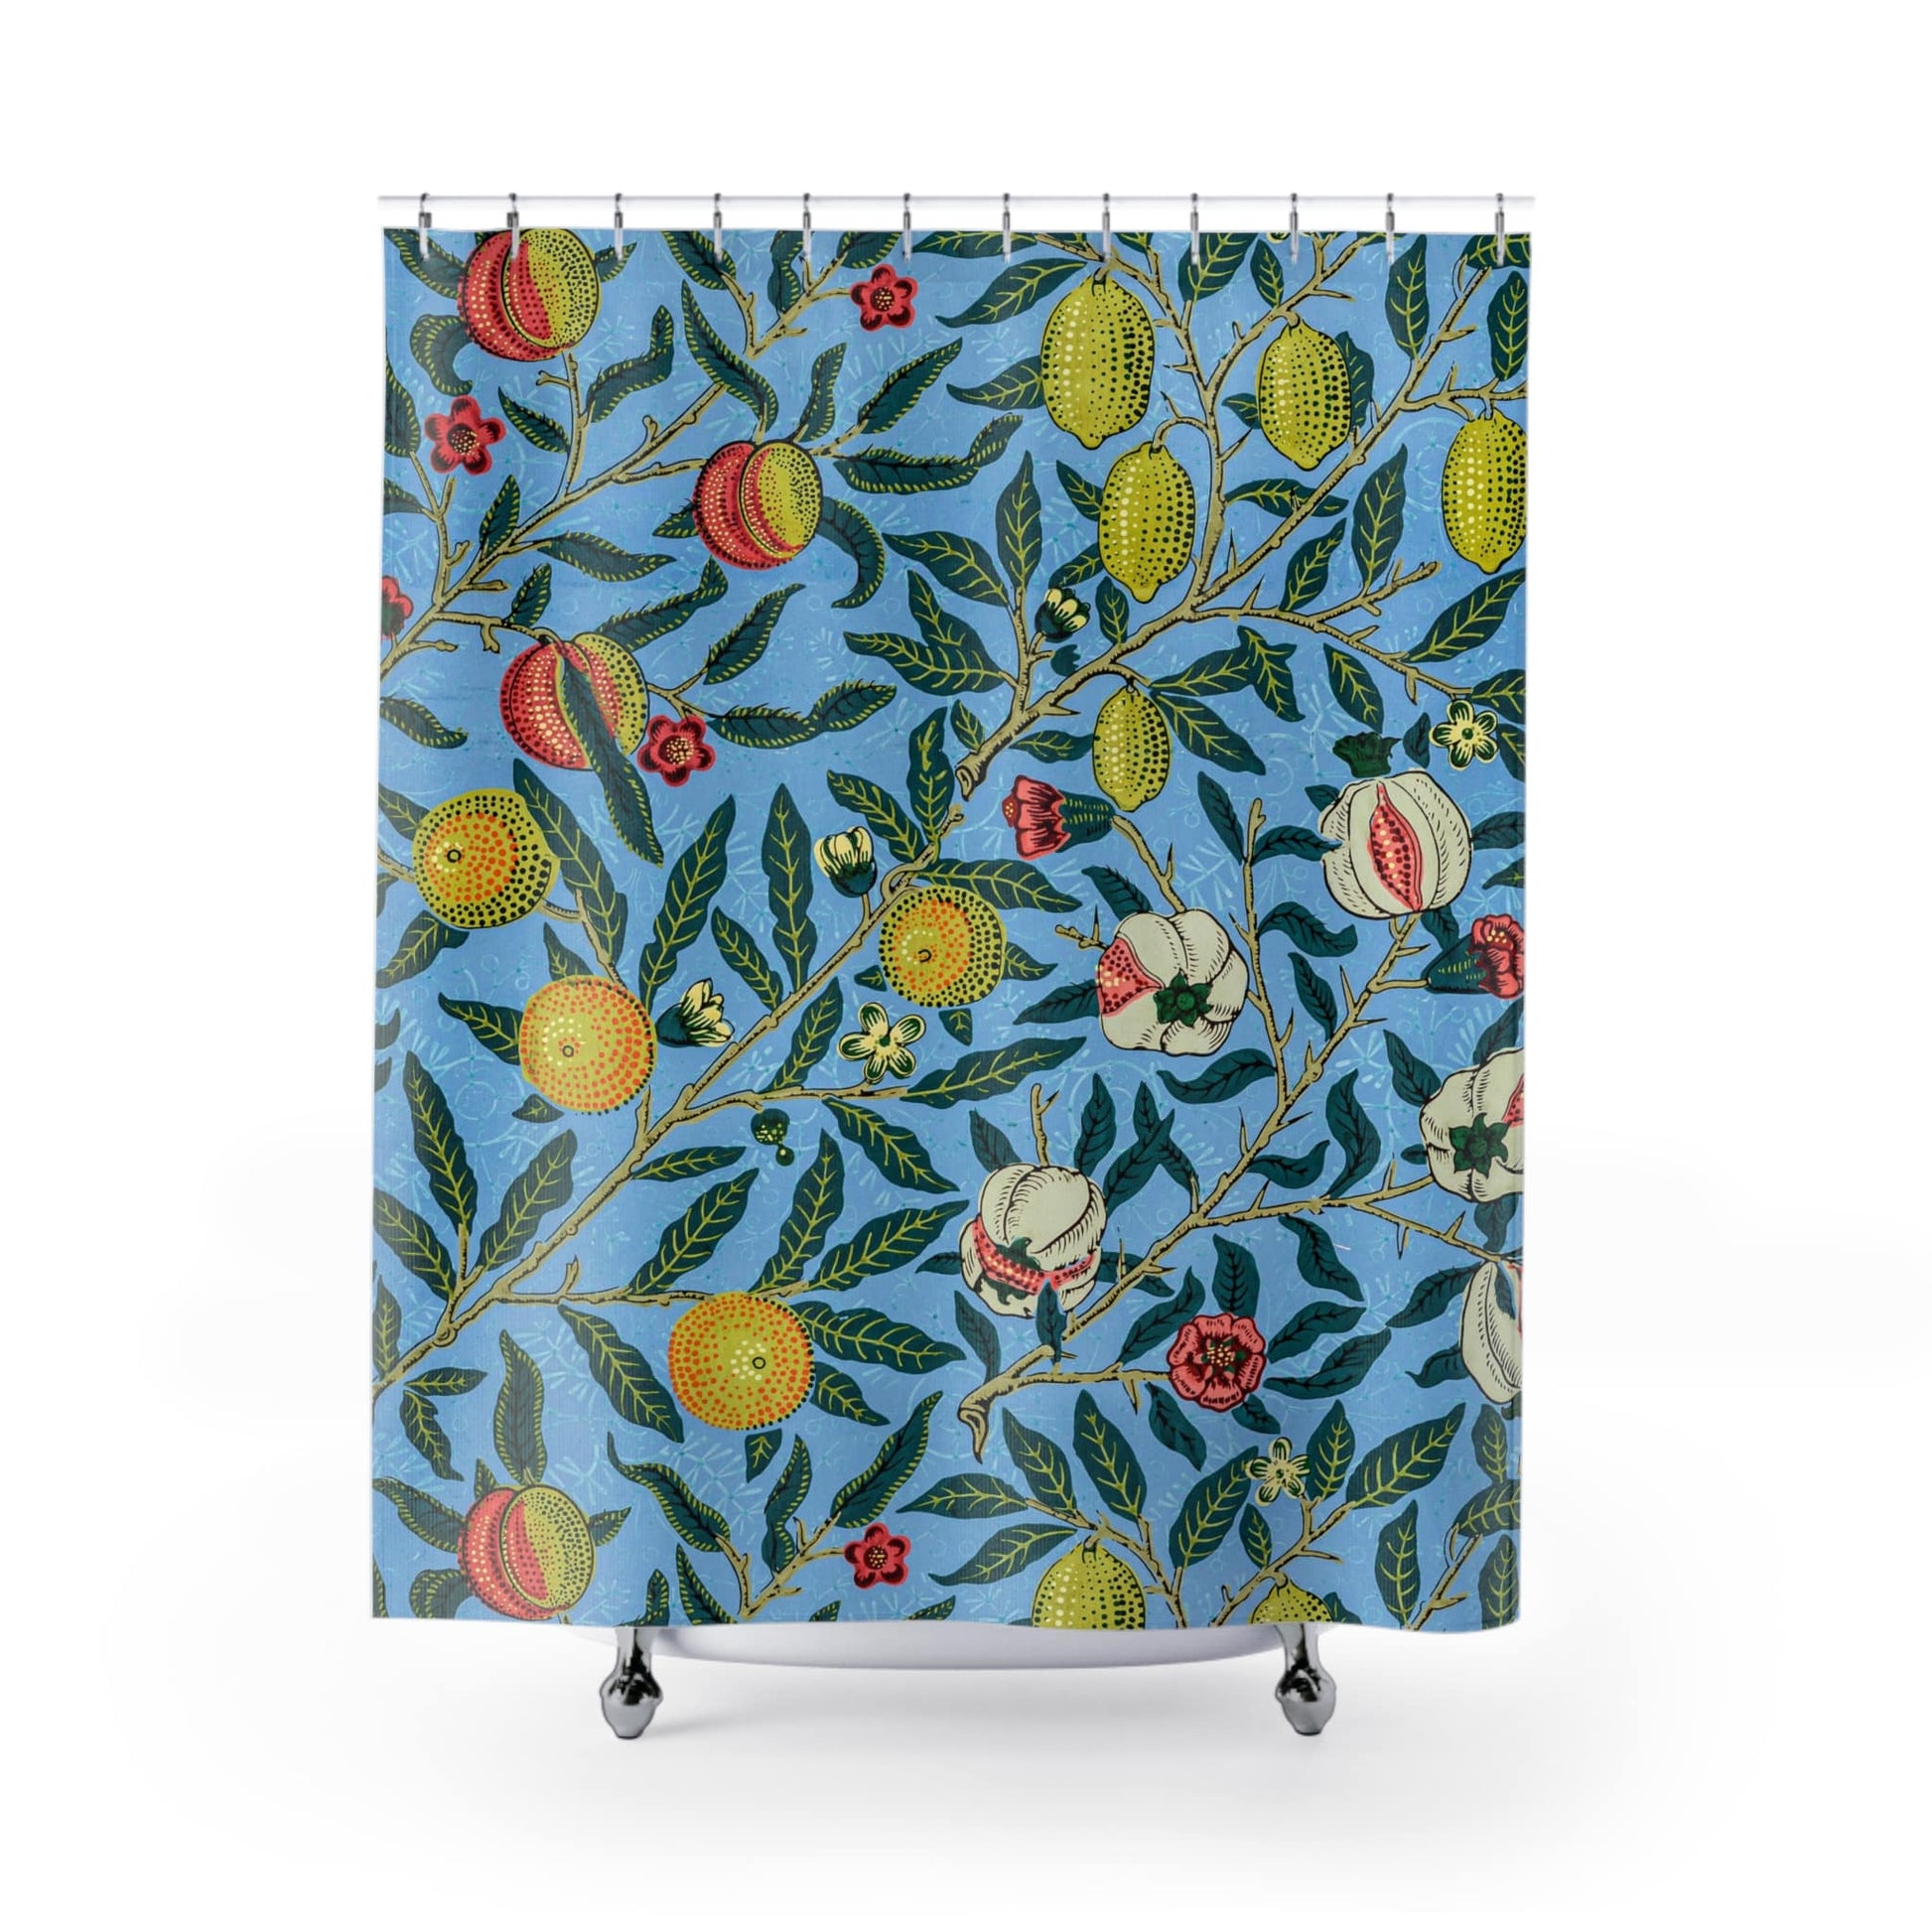 Eclectic Plants Shower Curtain with William Morris design, classic bathroom decor featuring Morris's botanical themes.